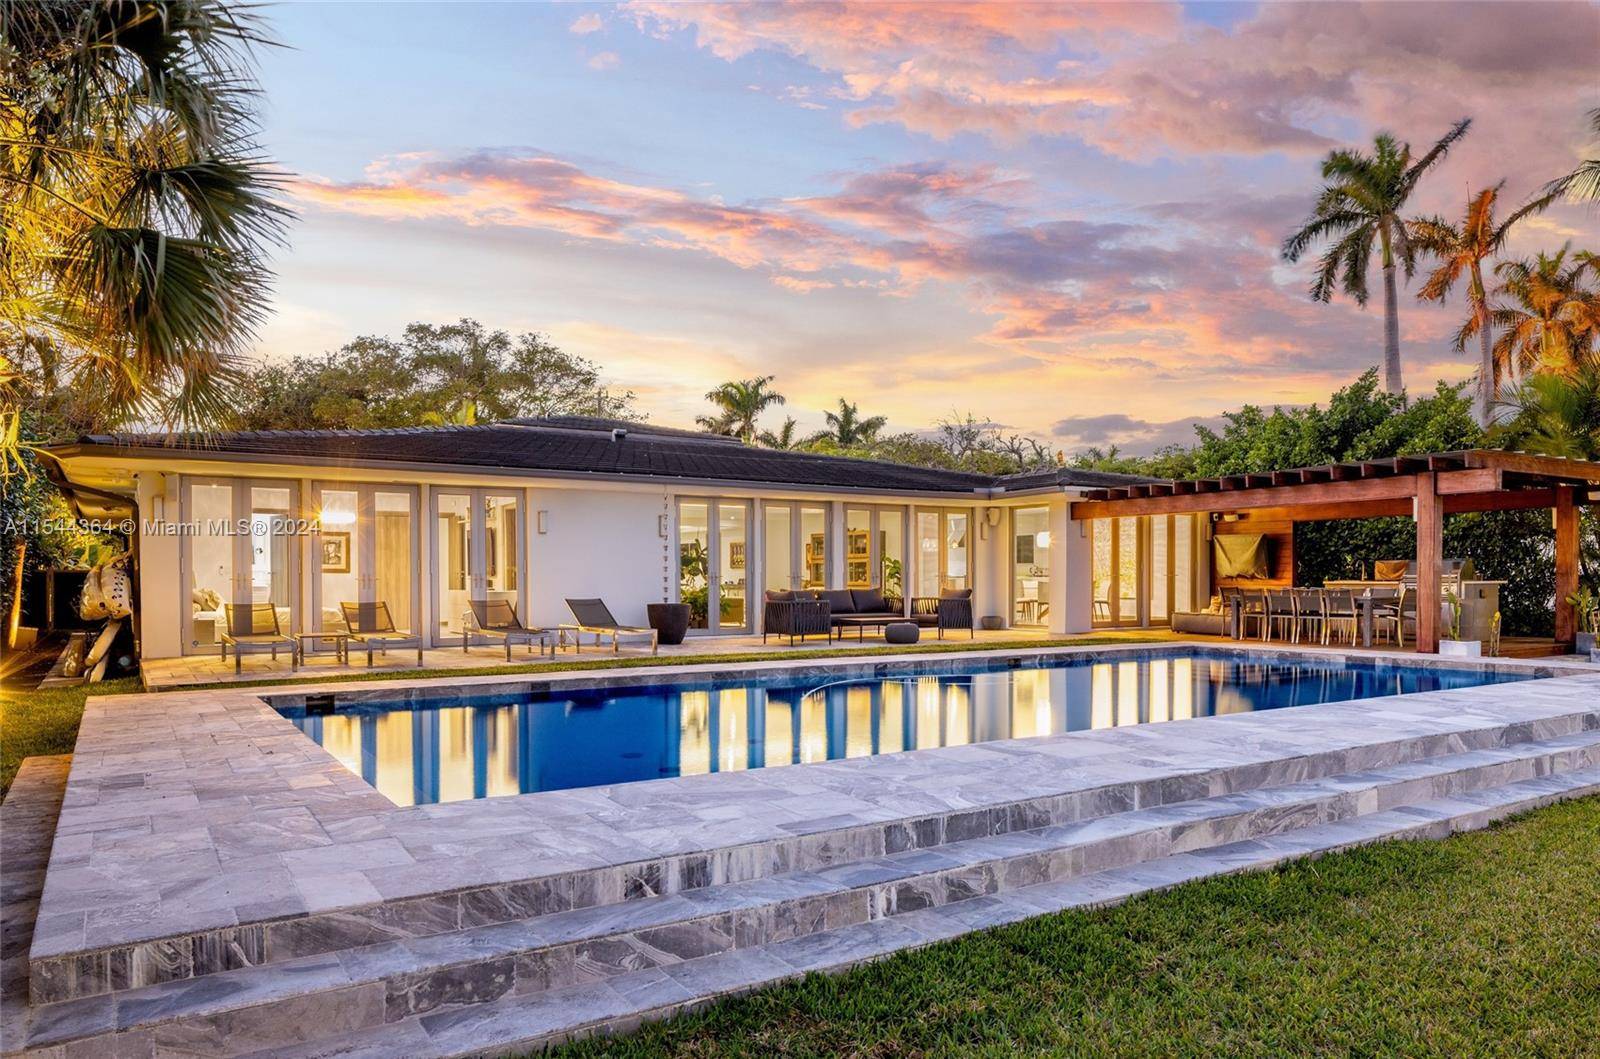 Experience open bay waterfront luxury living in Miami Shores.